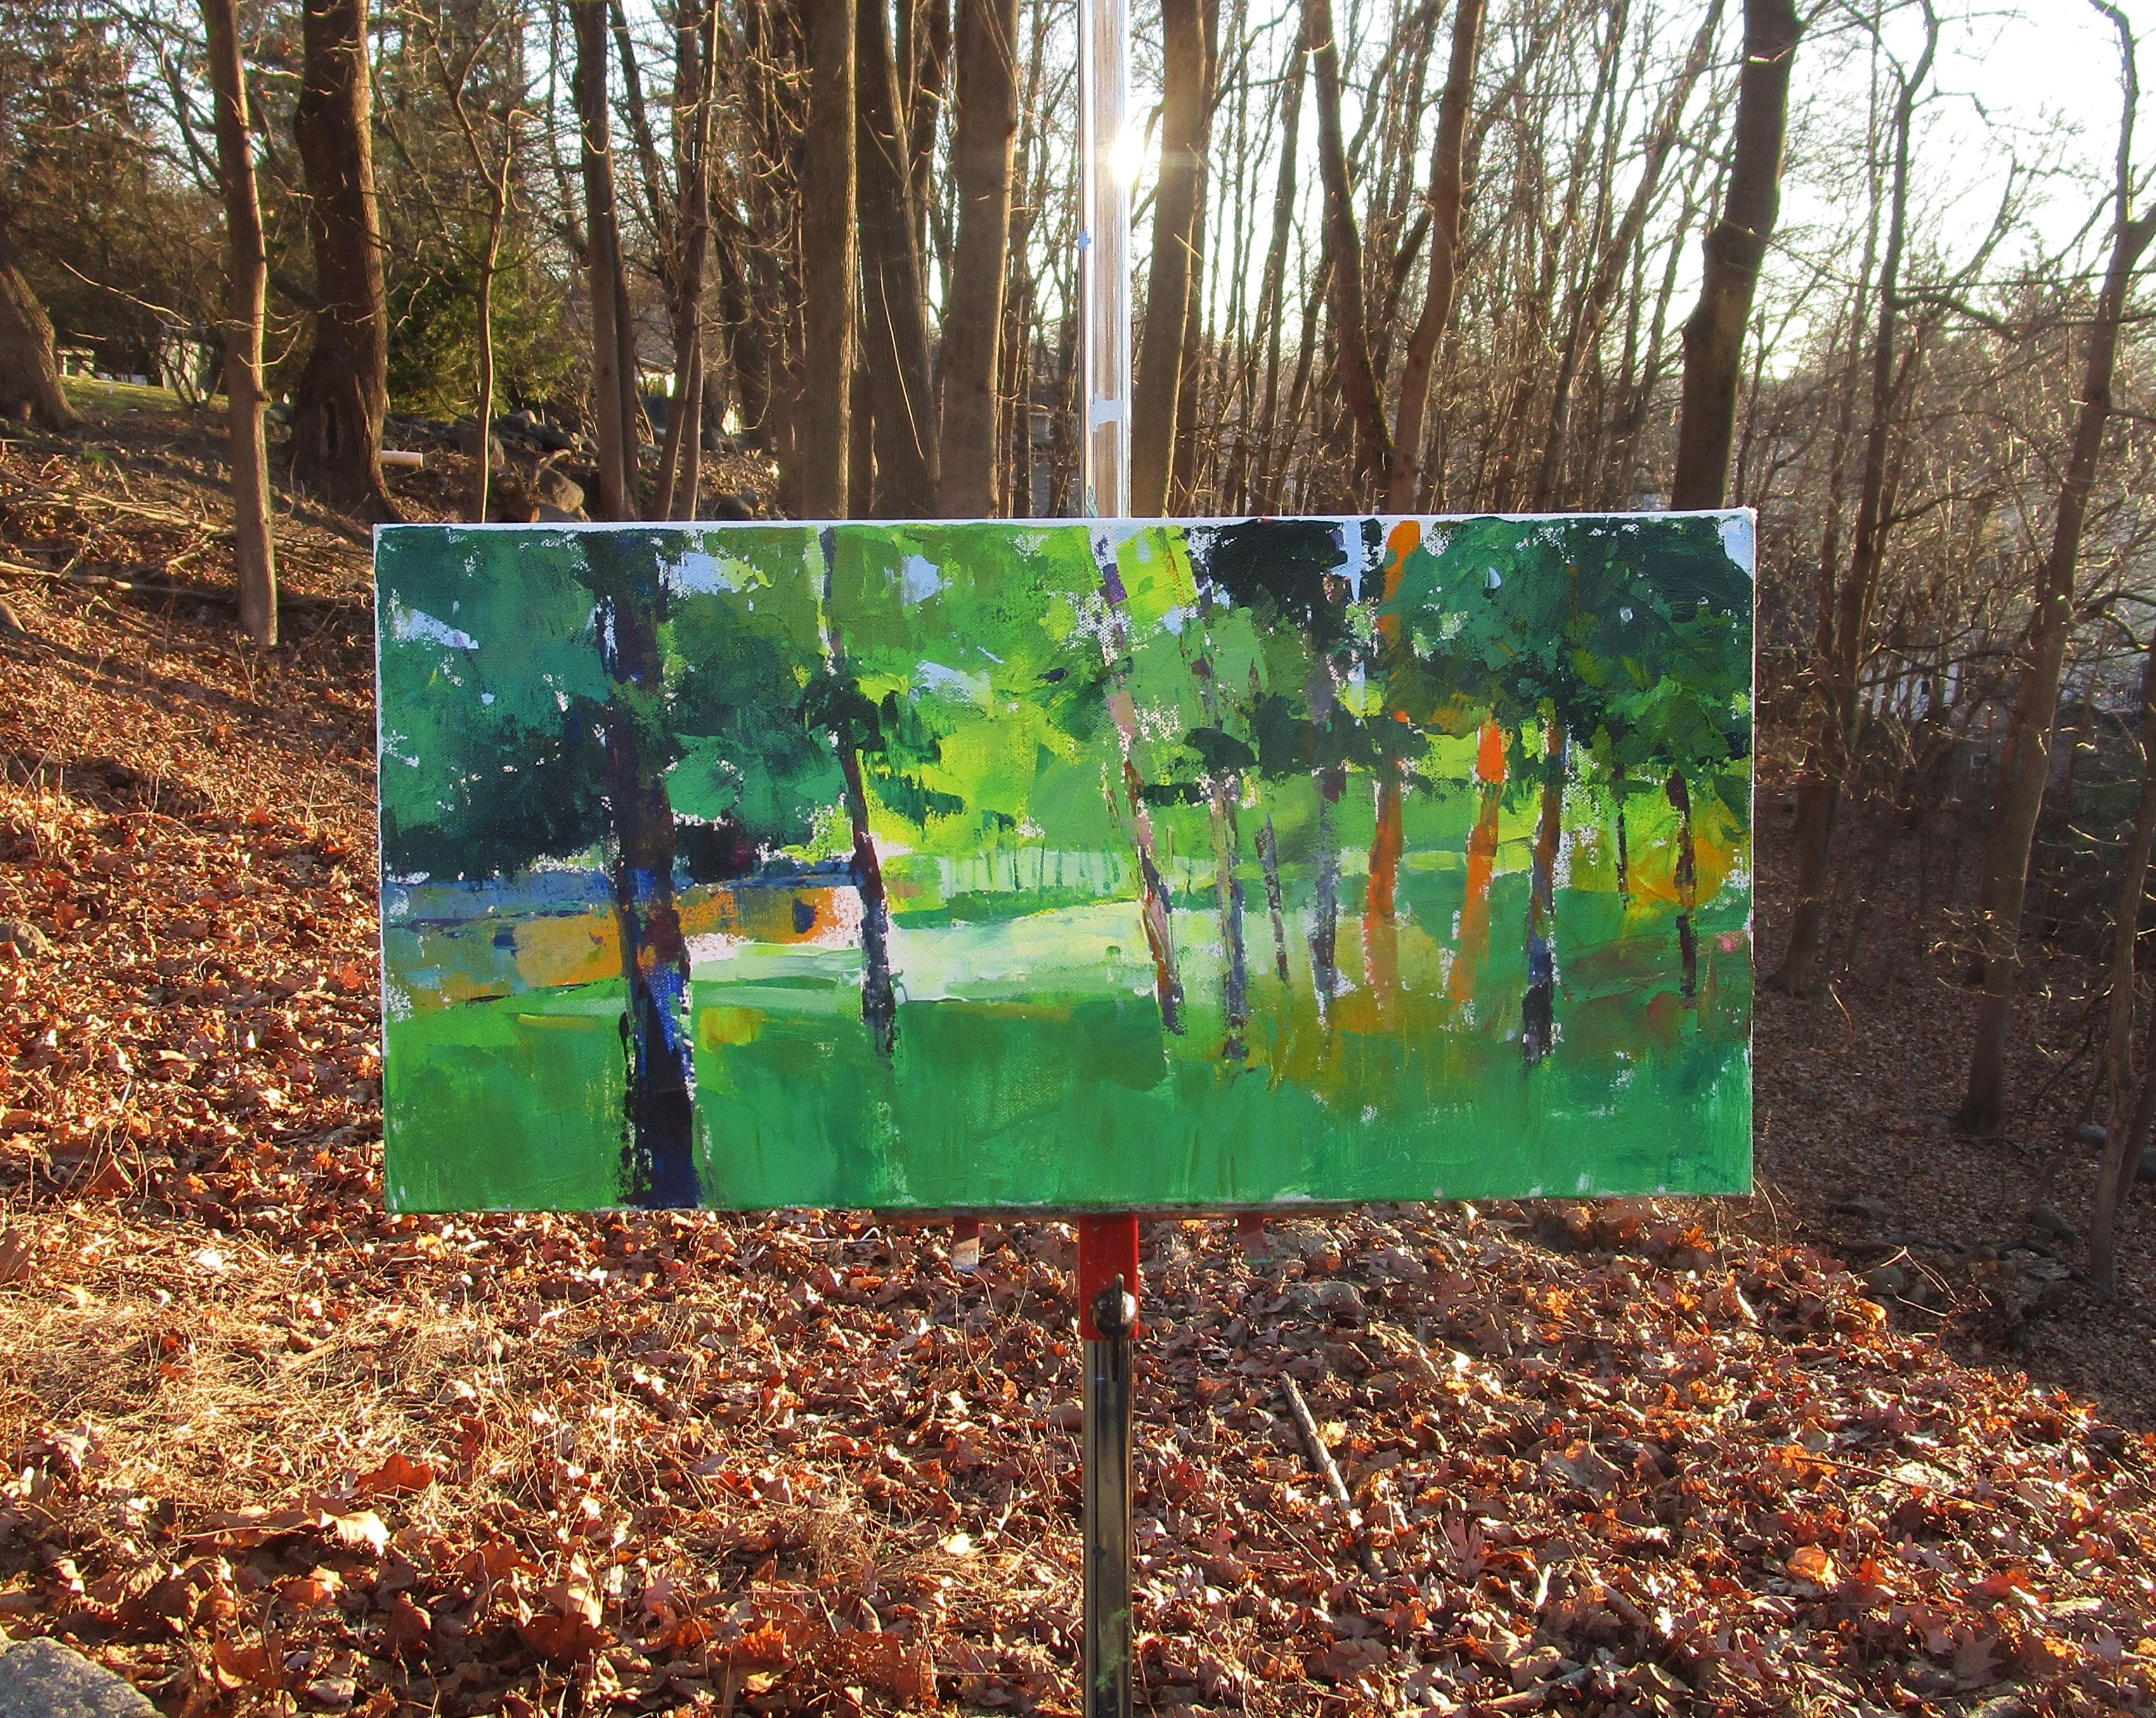 <p>Artist Comments<br>Low buildings hide among nature in an abandoned day camp. The sunlight filters through the trees, painting the grass with a soft radiance. The expressive brushstrokes and loose details add an evocative touch to the tranquil